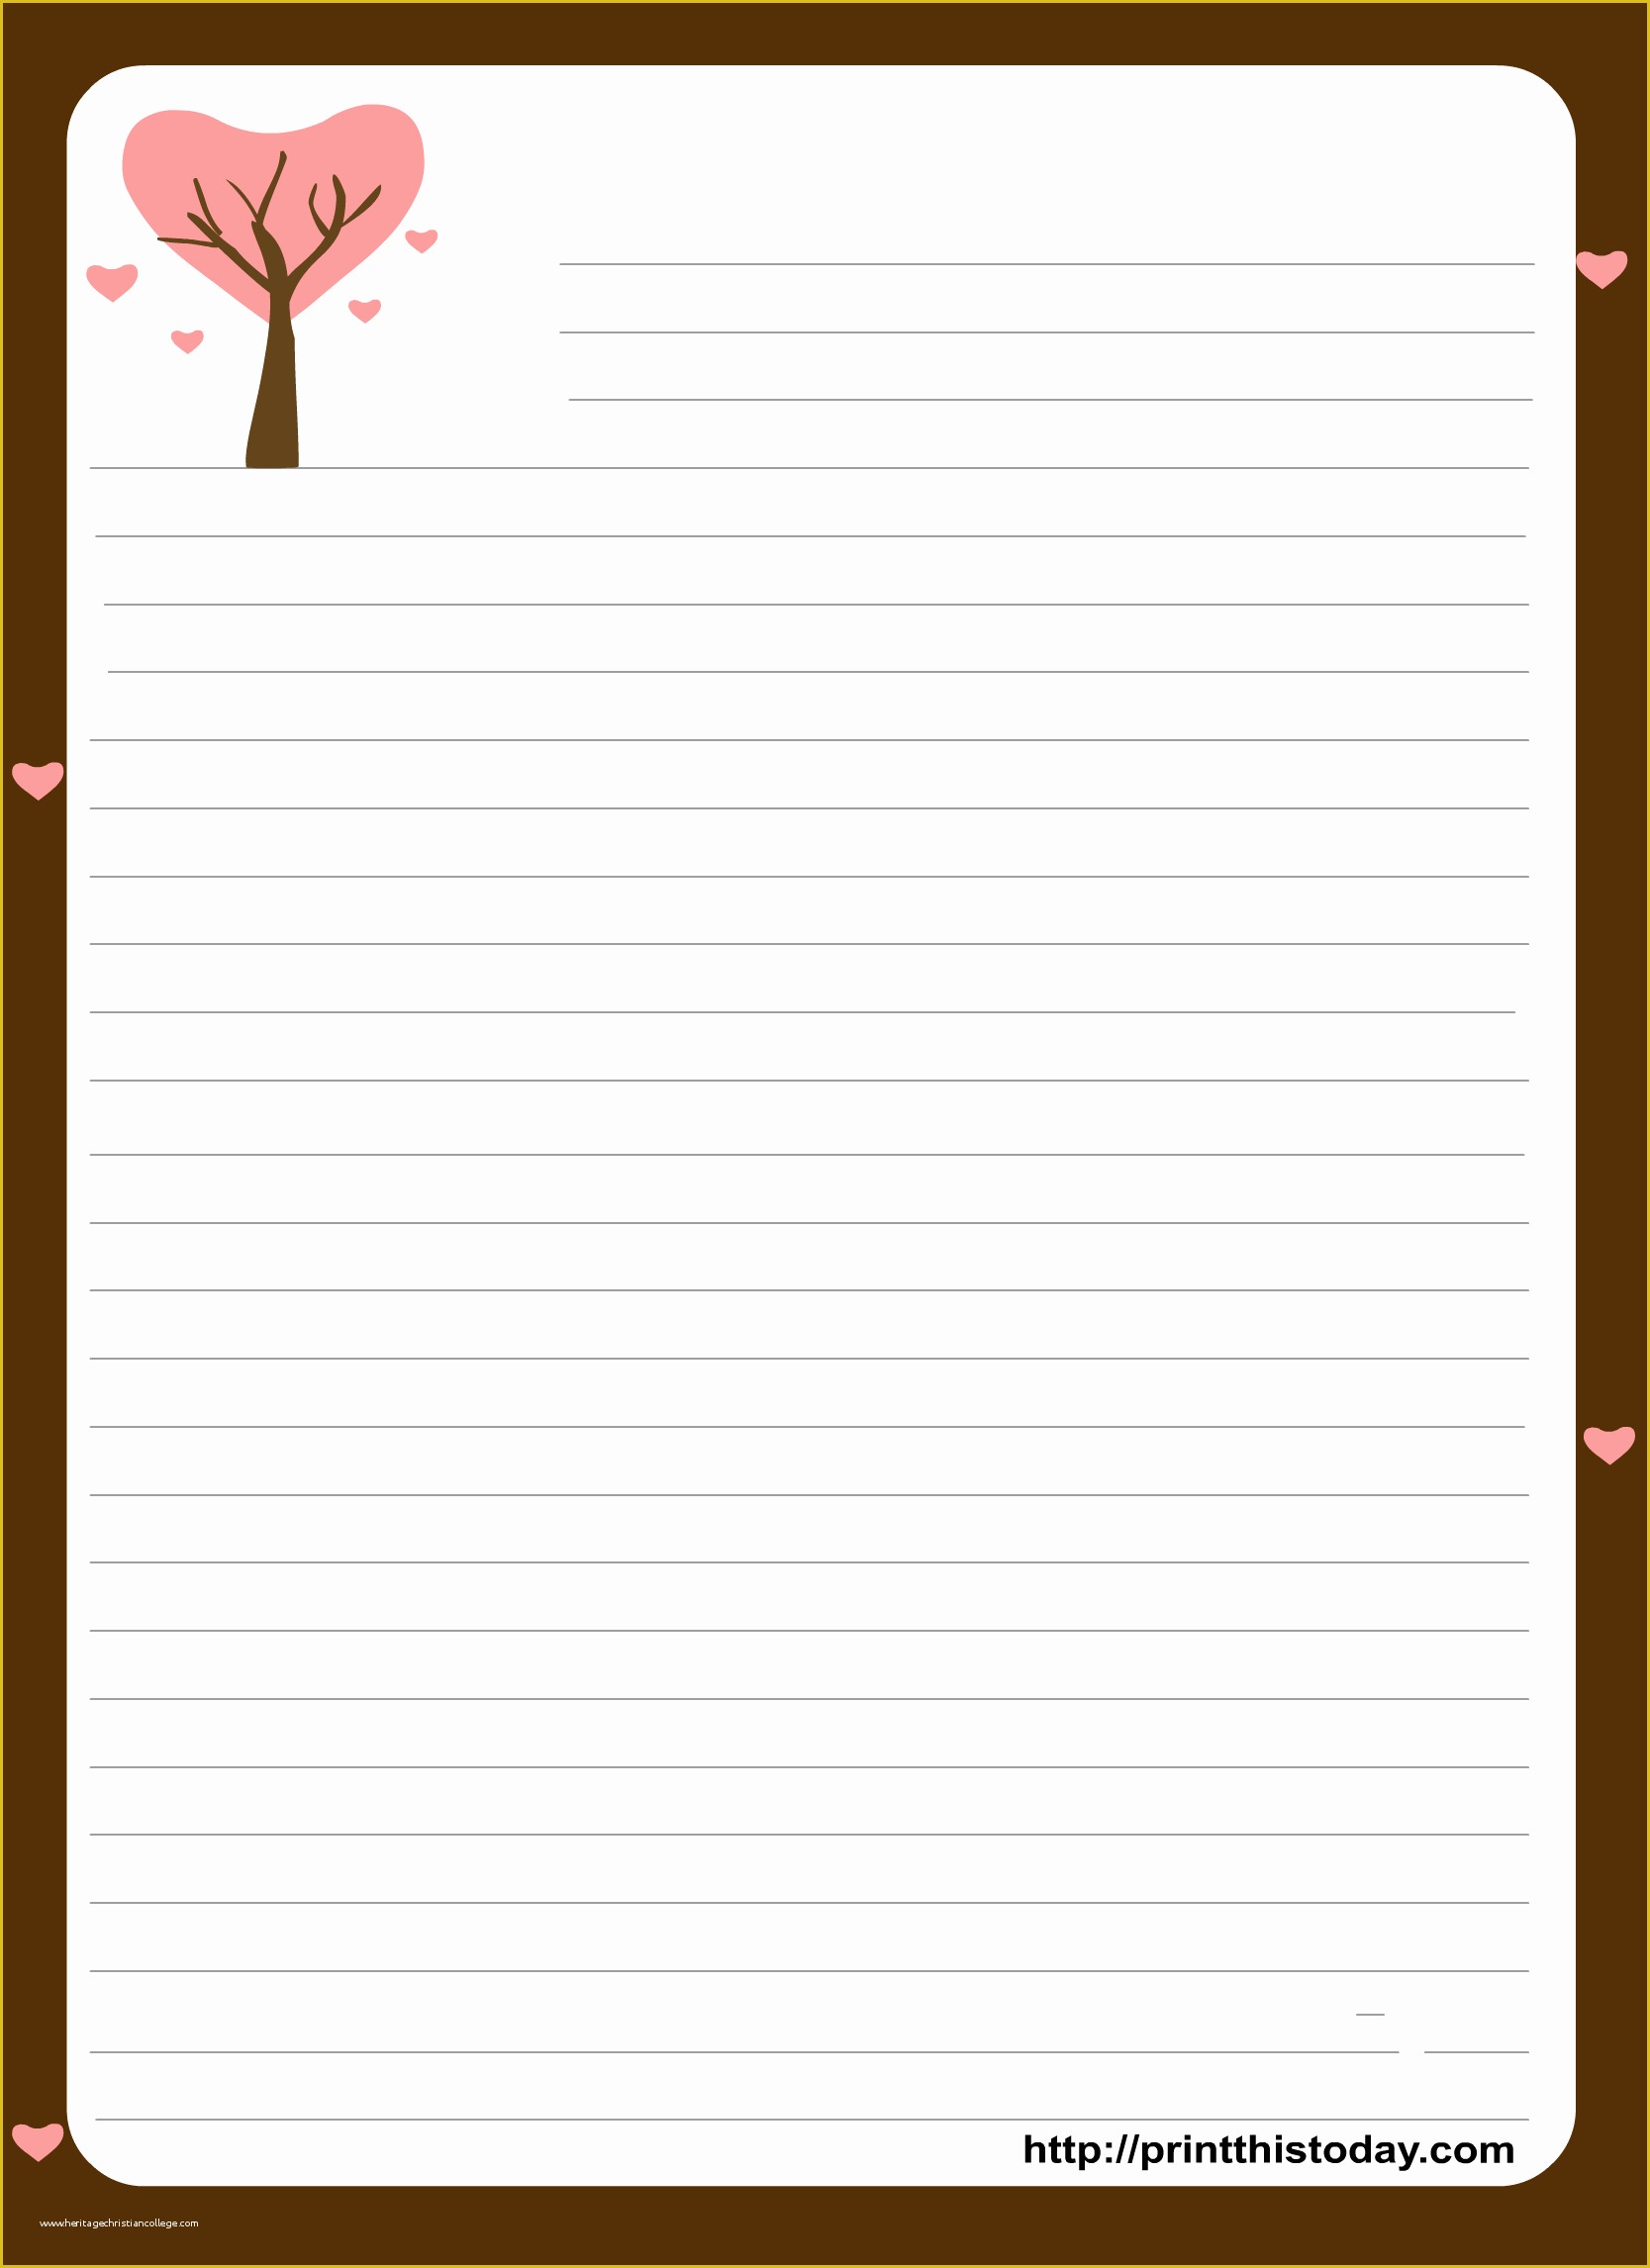 Free Printable Stationery Templates Of Free Printable Stationery Paper